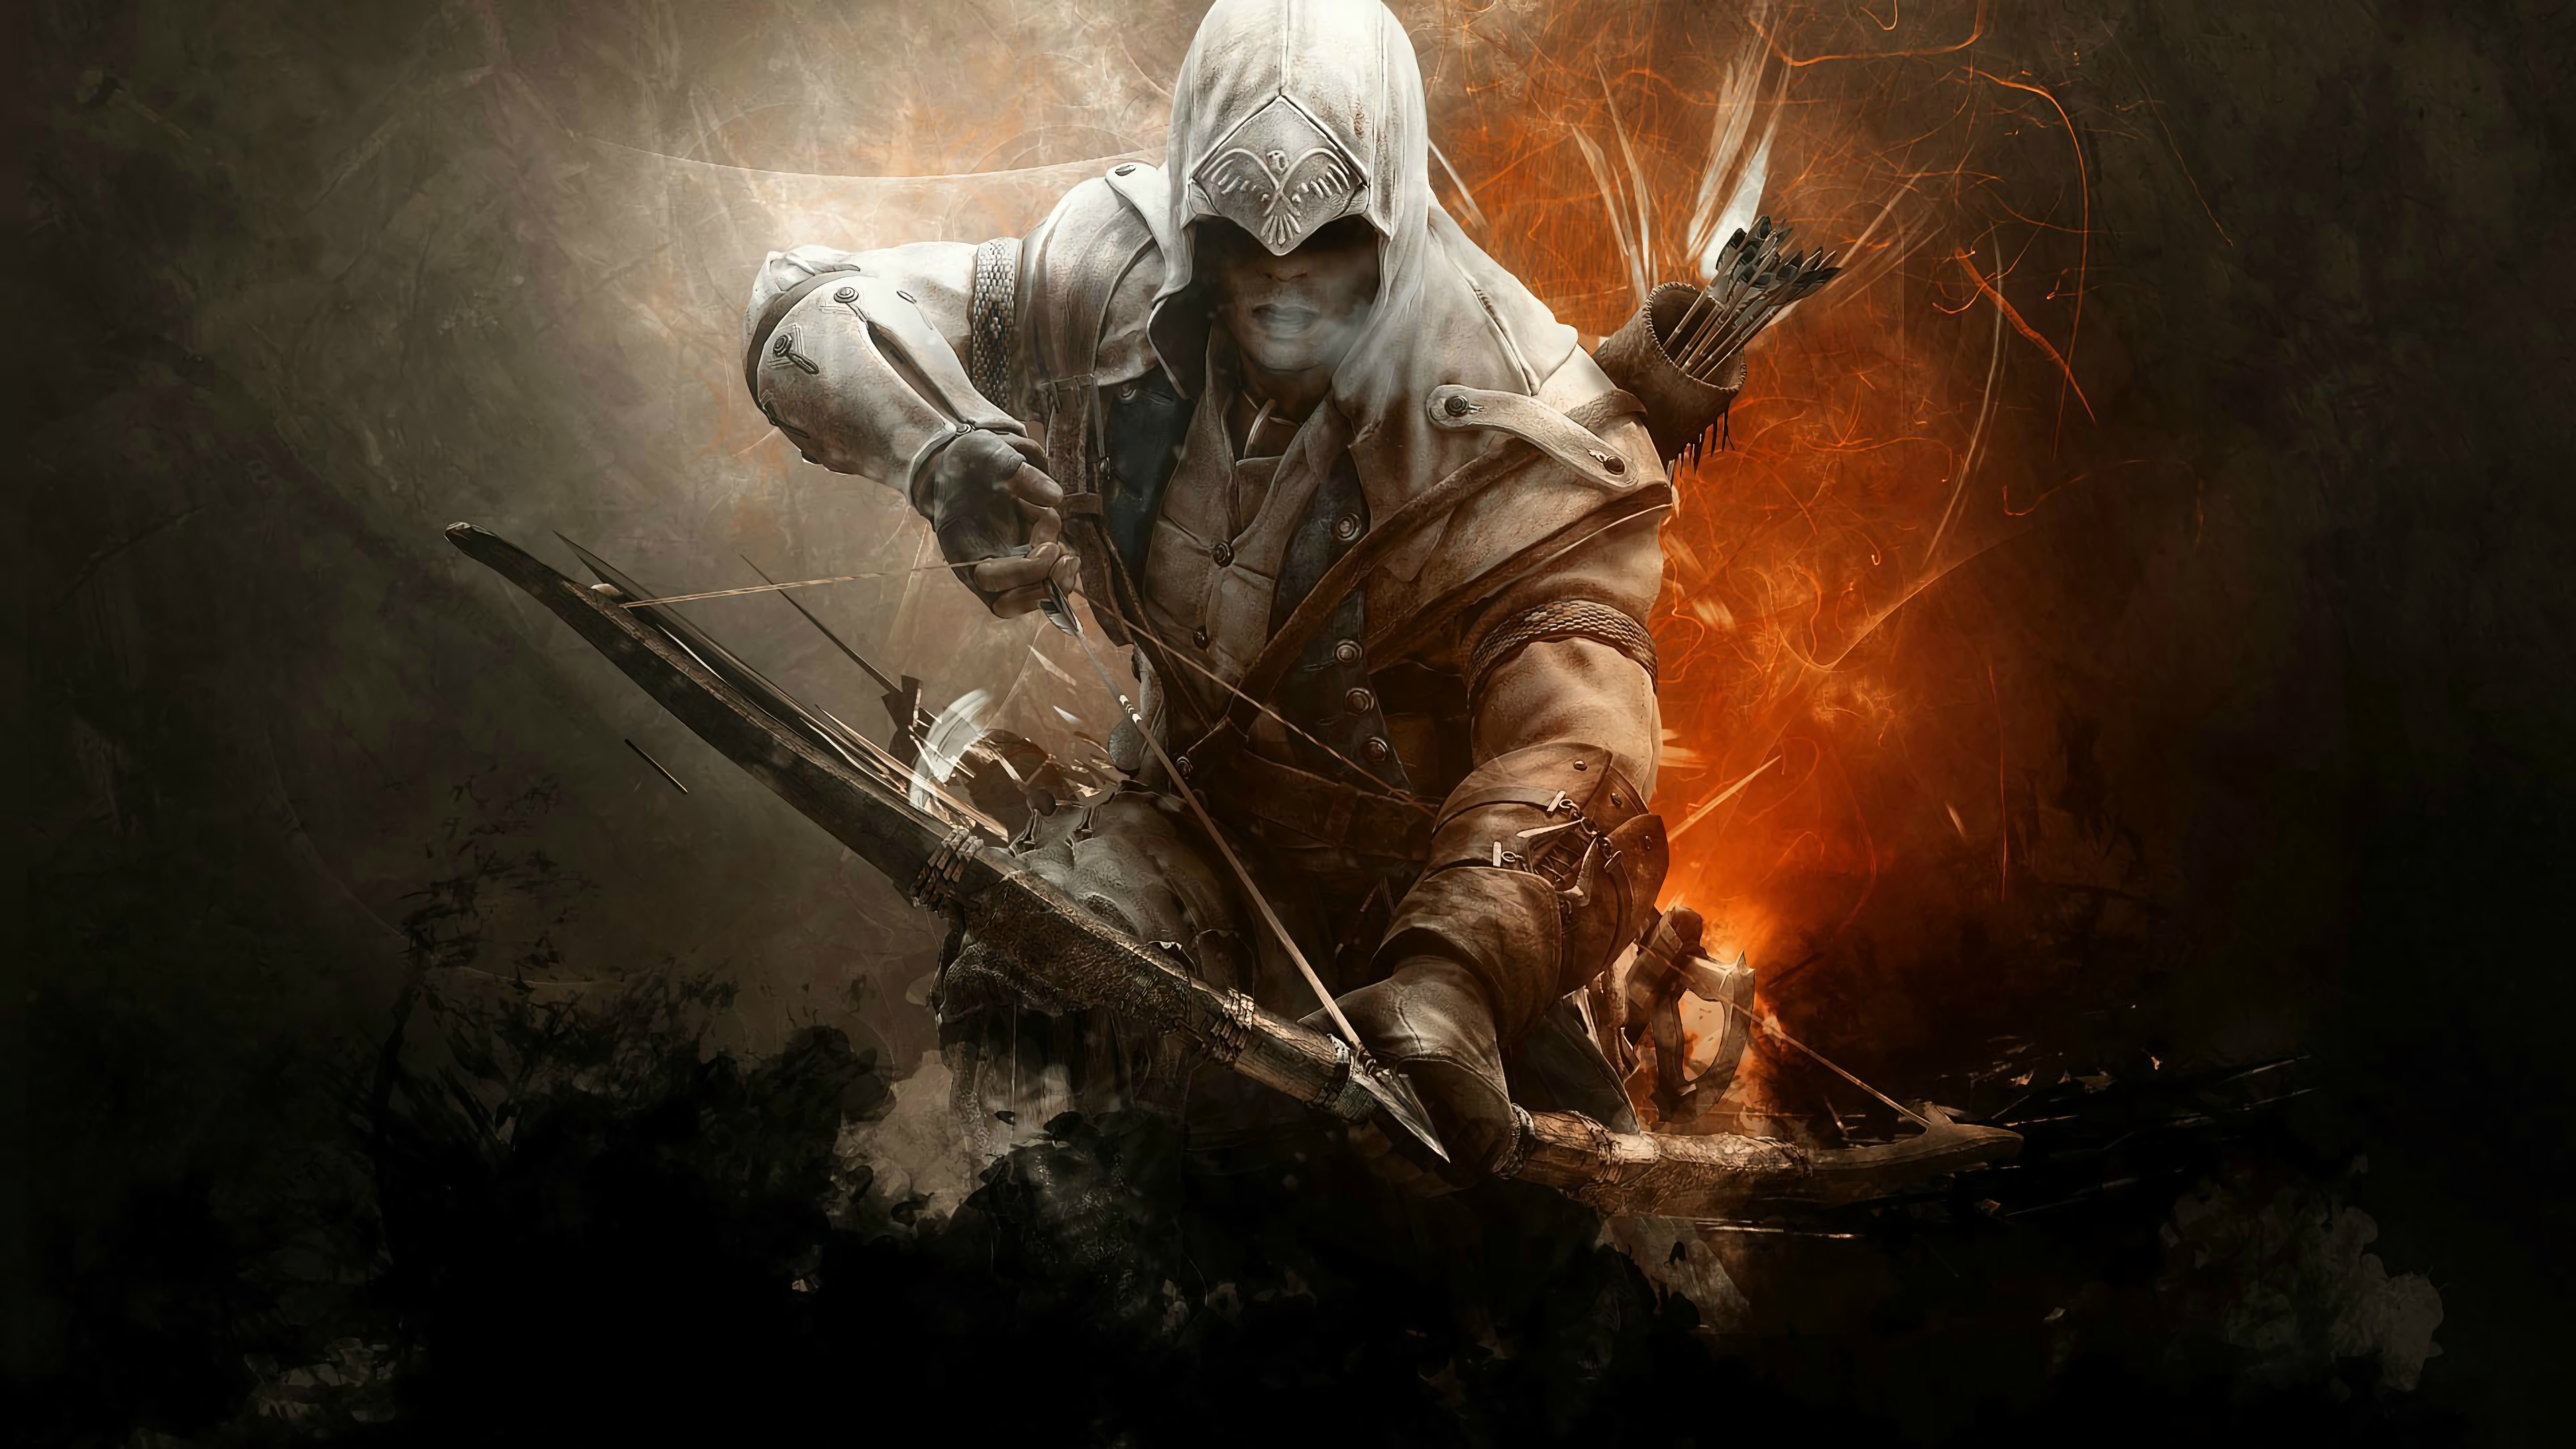 General 3840x2160 Assassin's Creed Assassin's Creed III Conner Kenway video games video game art video game men bow and arrow hoods video game characters